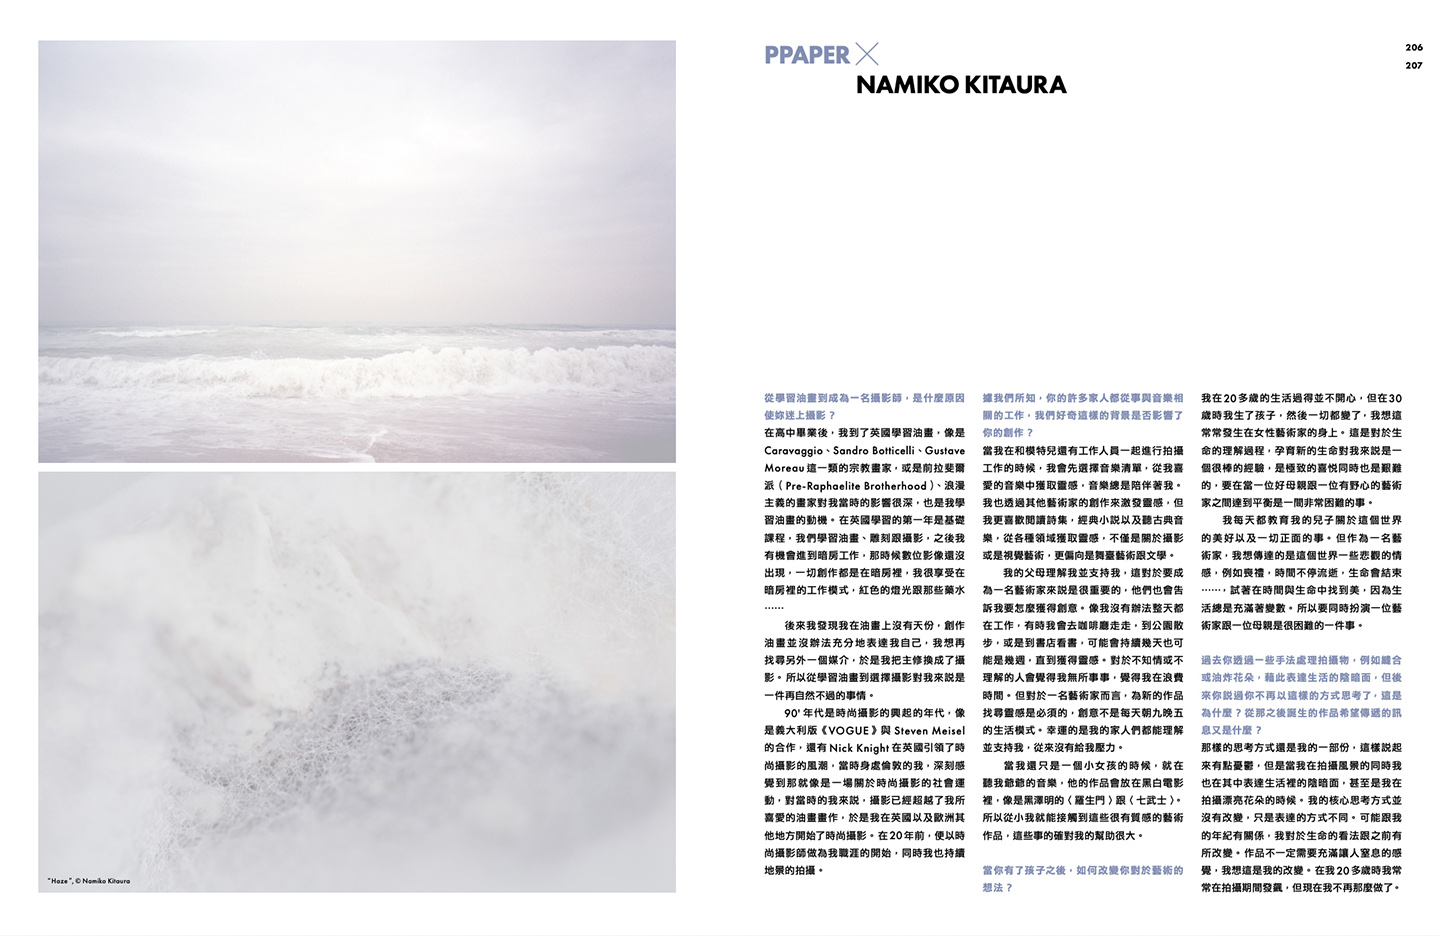 special feature on Namiko Kitaura by PPAPER Taiwan